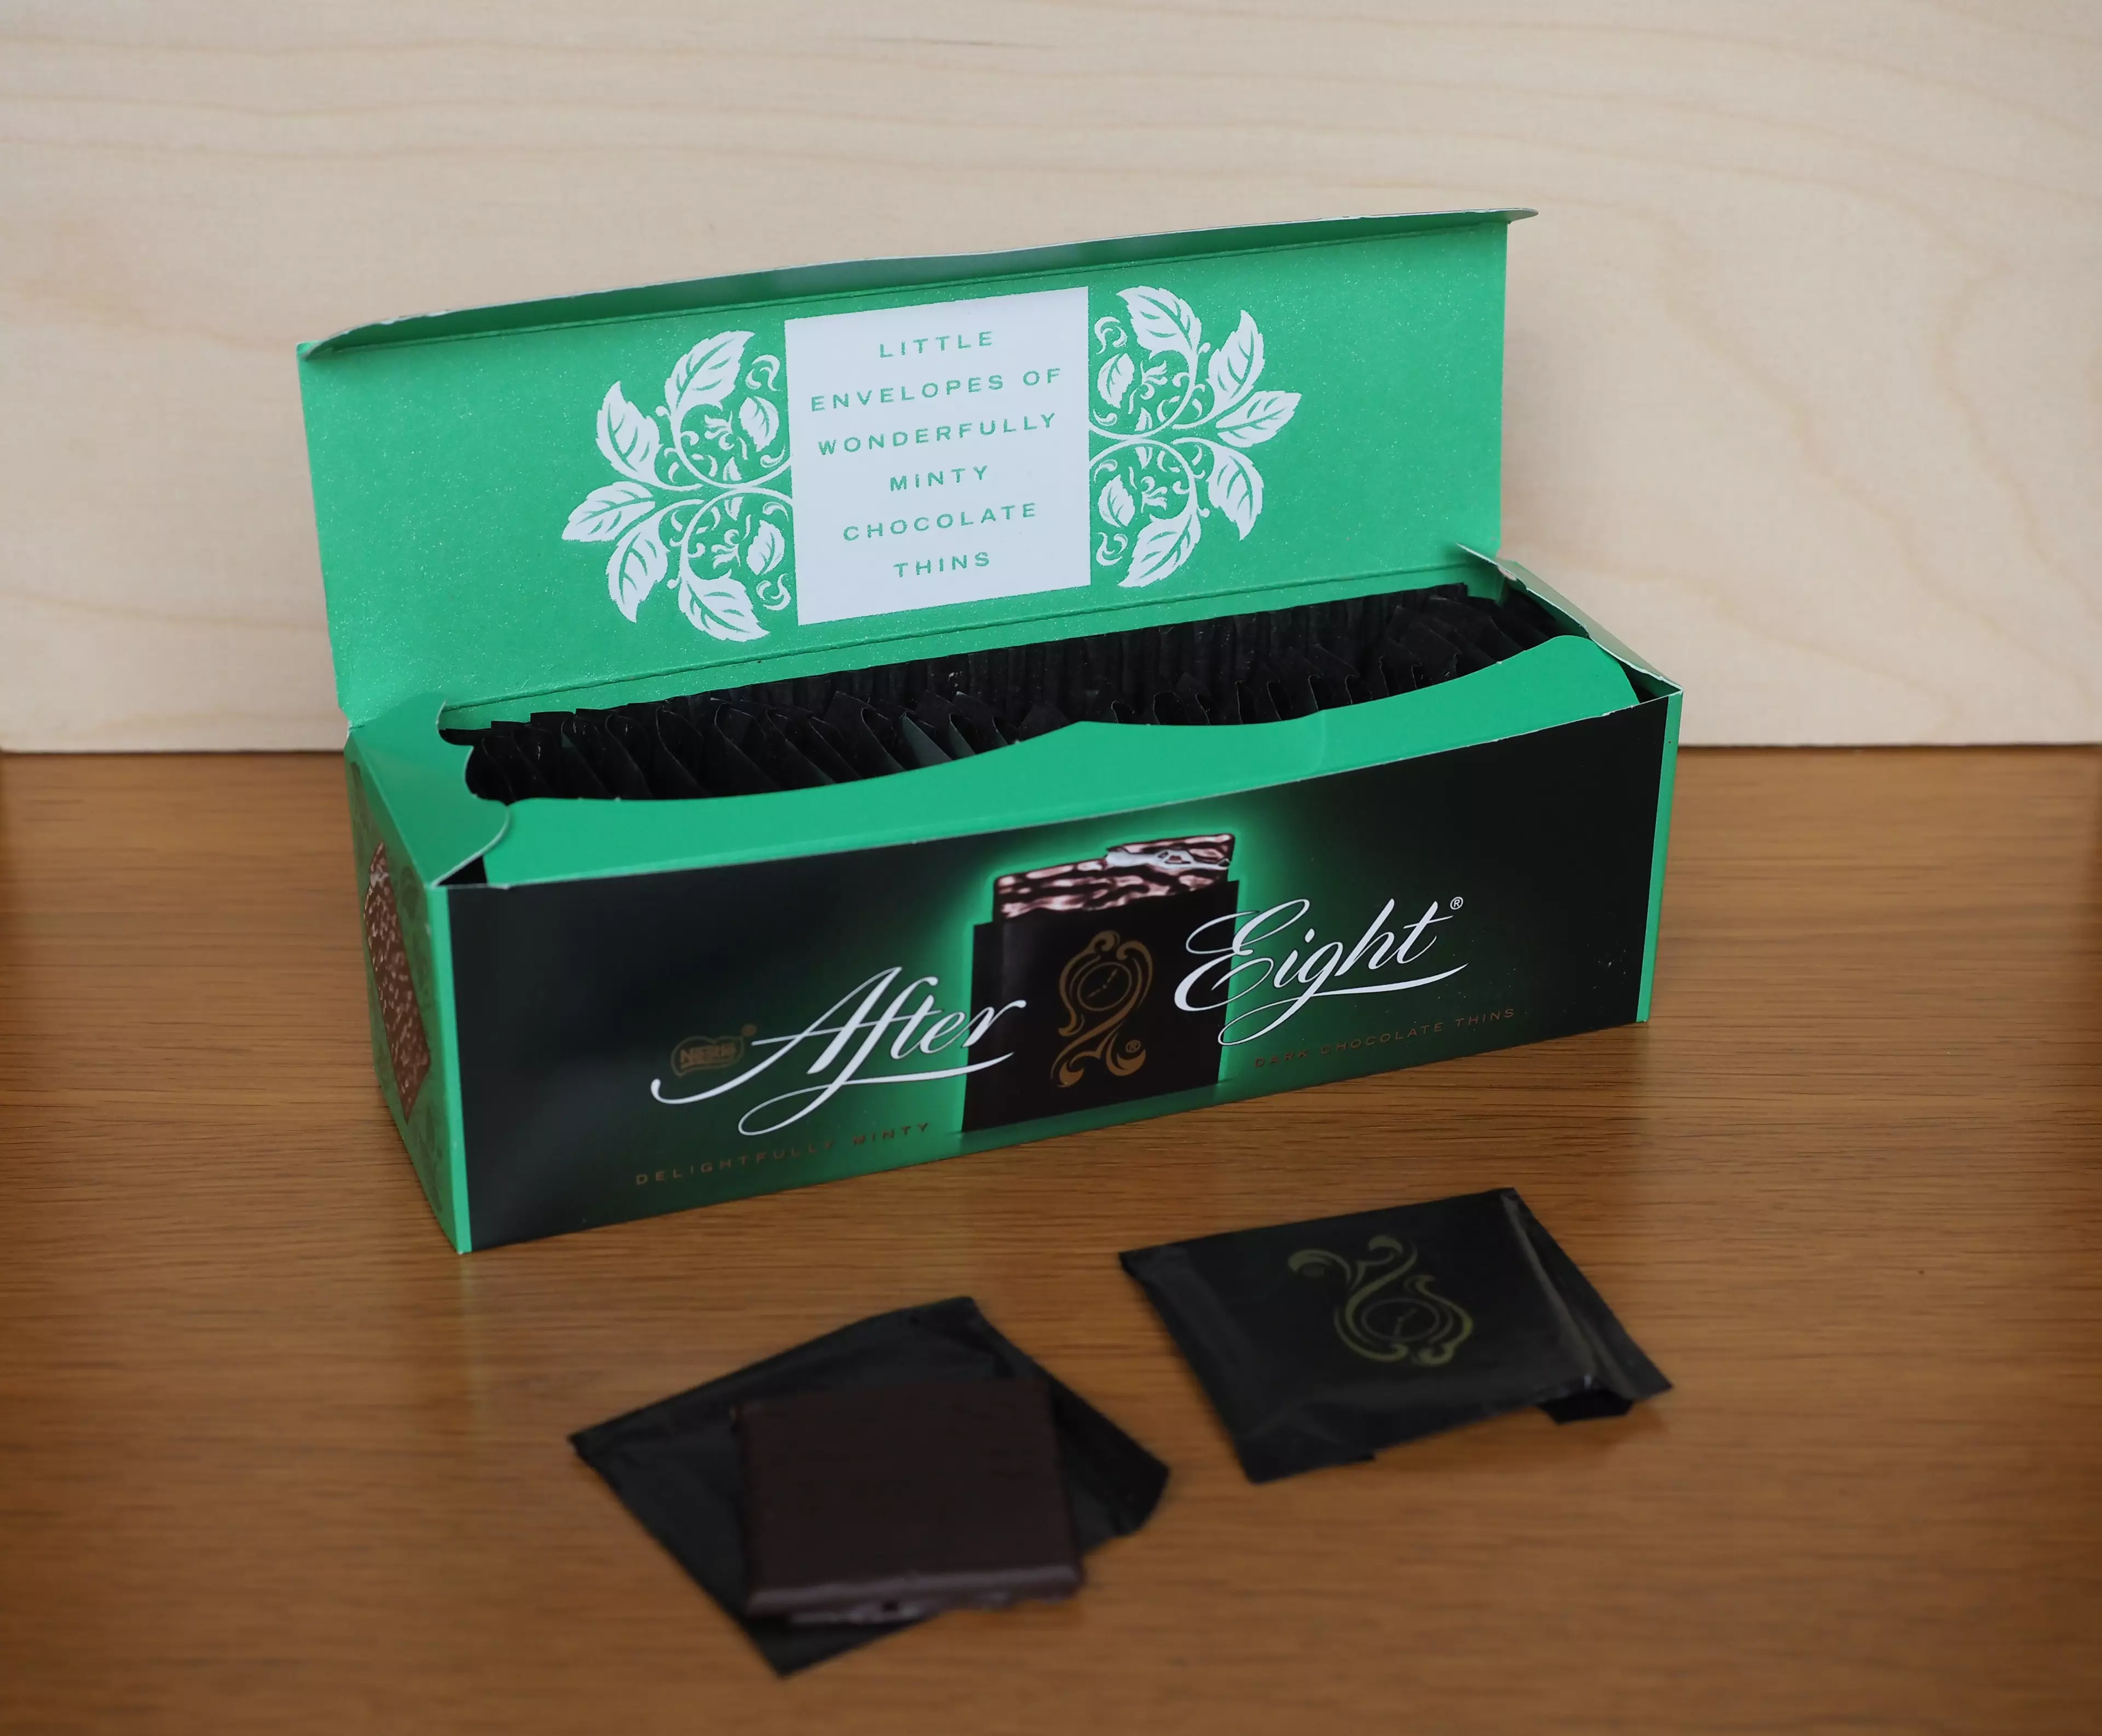 We're always up for an After Eight, any time of day (